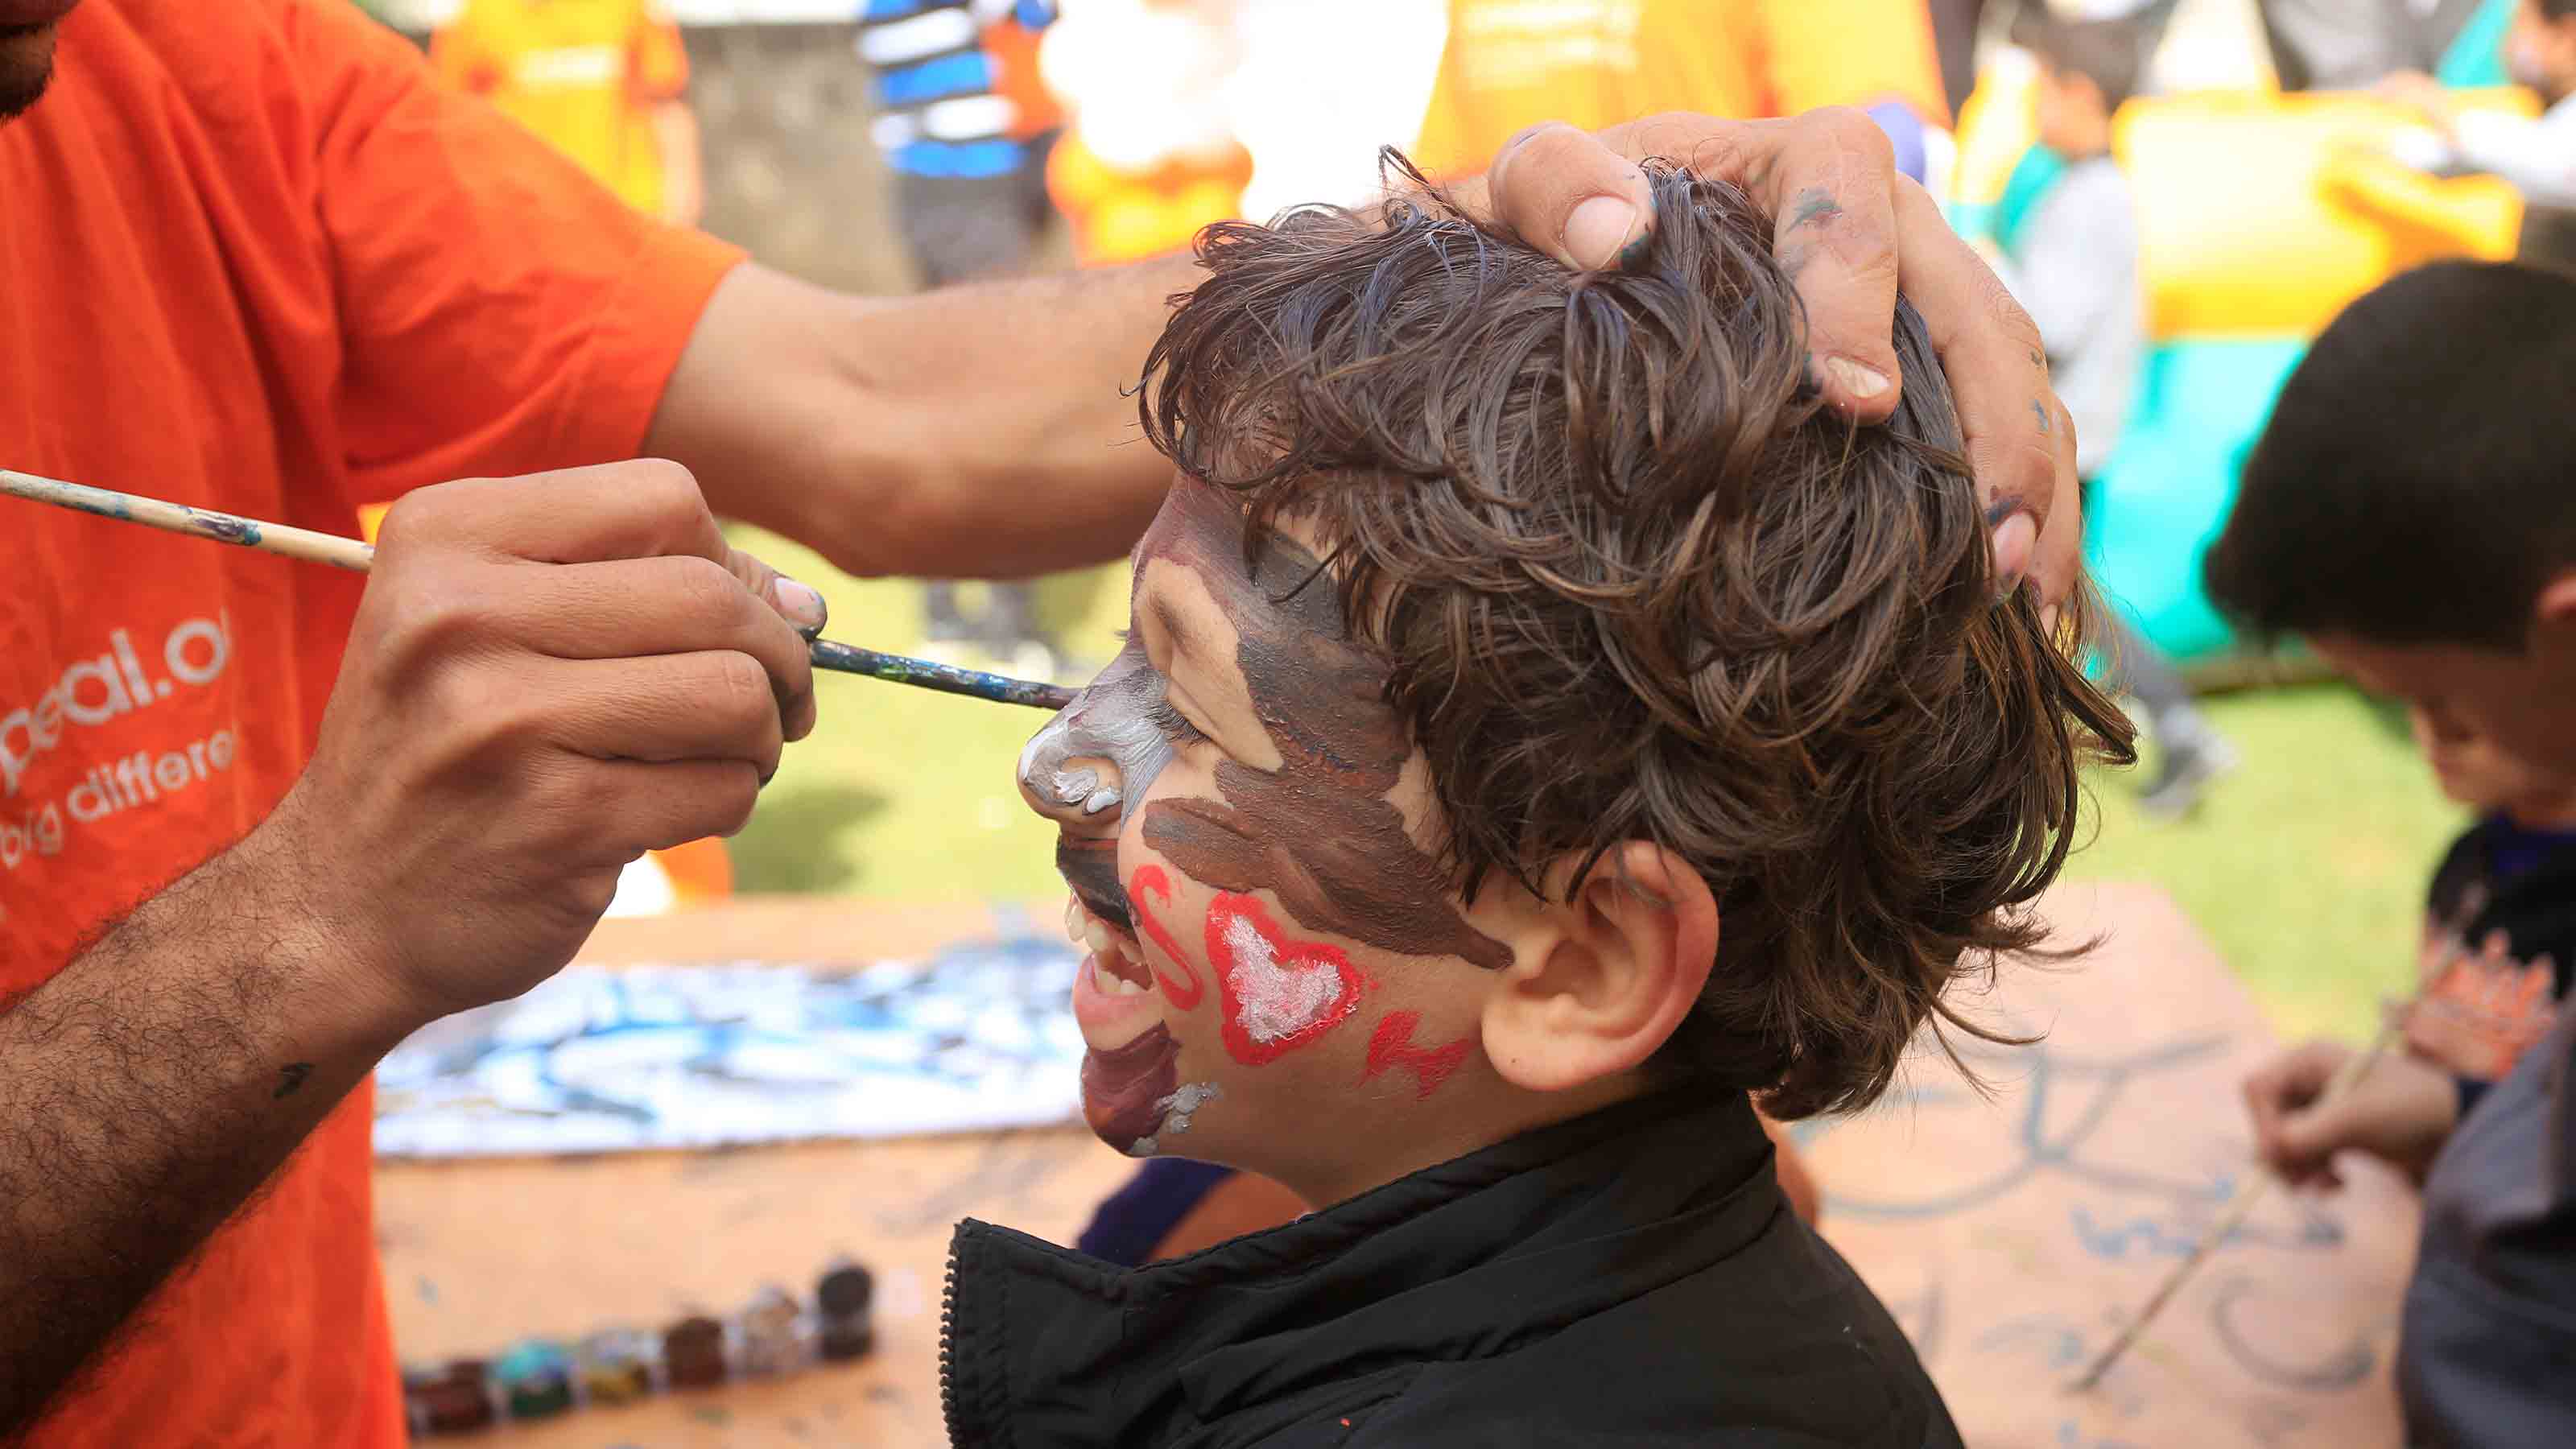 Smiling boy being face-painted